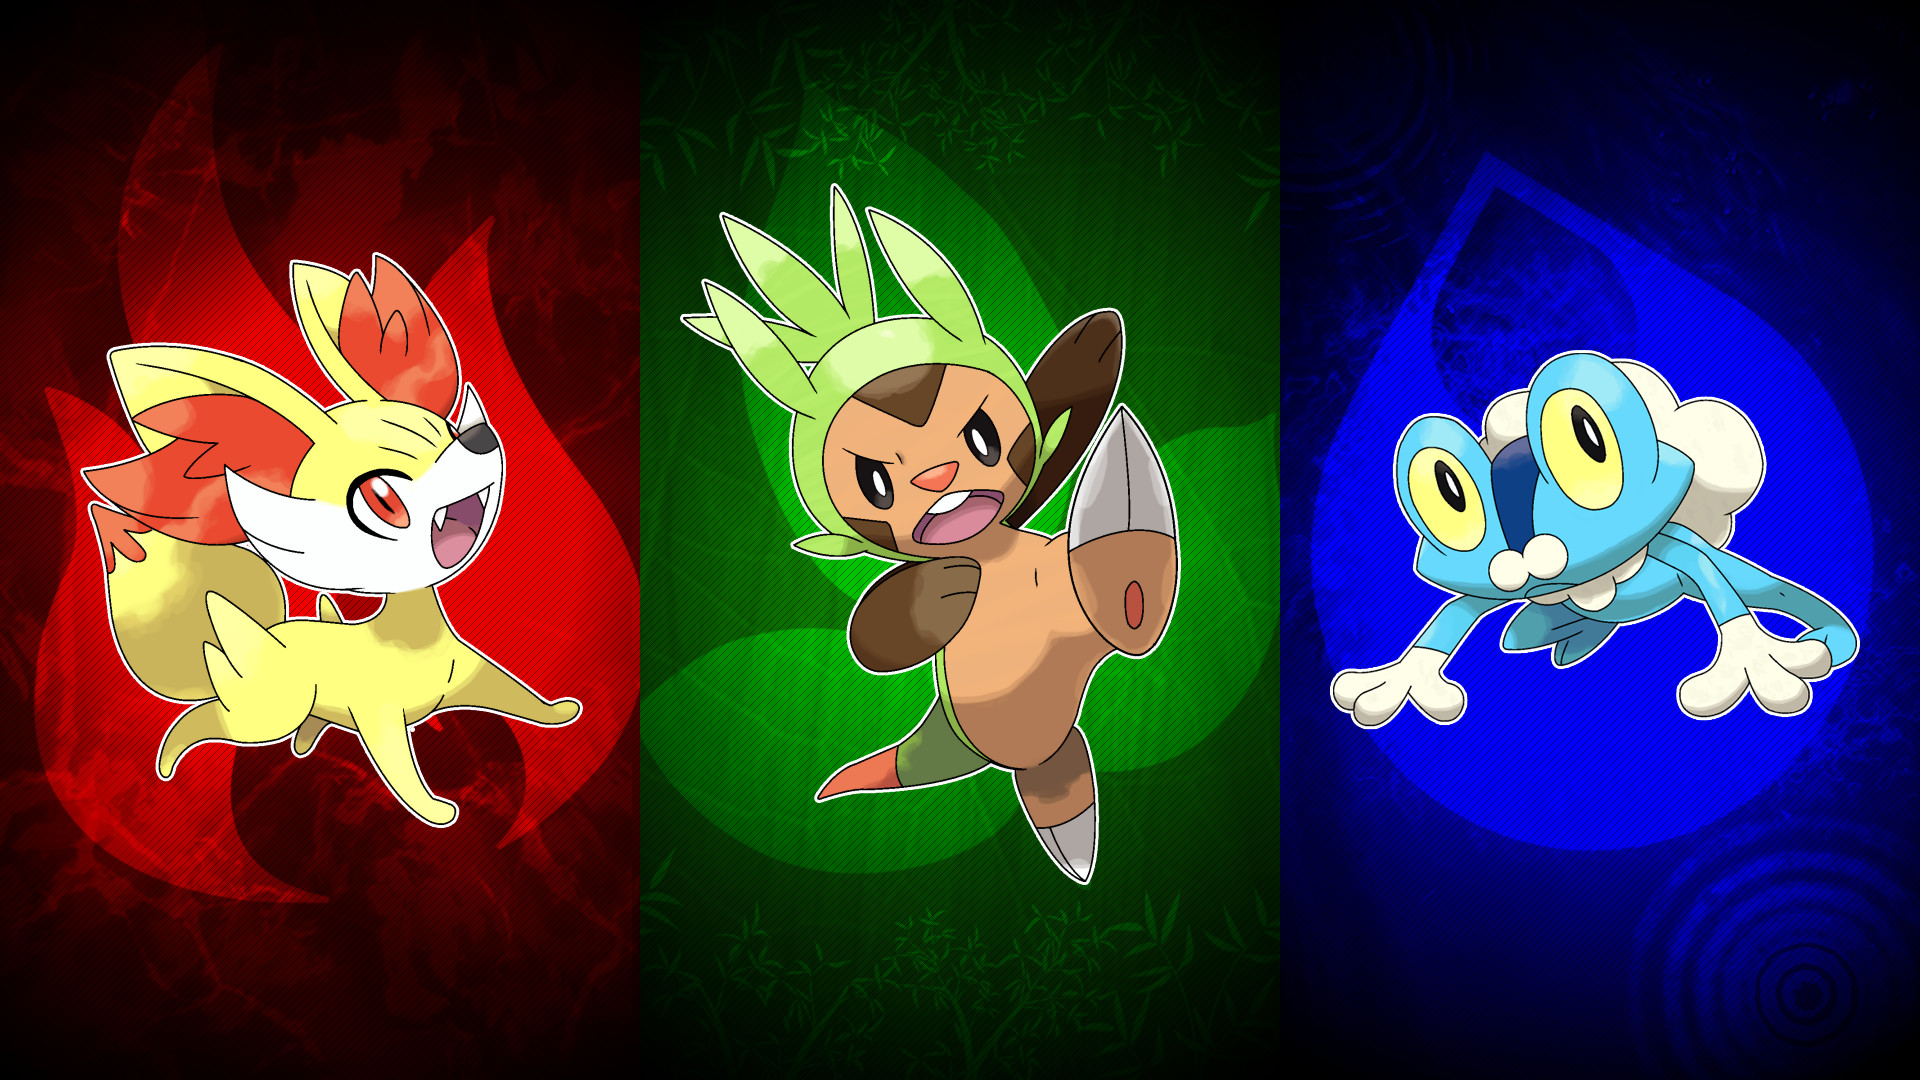 1920x1080 ... Pokemon X and Y Starters Wallpaper by UnlethalMango